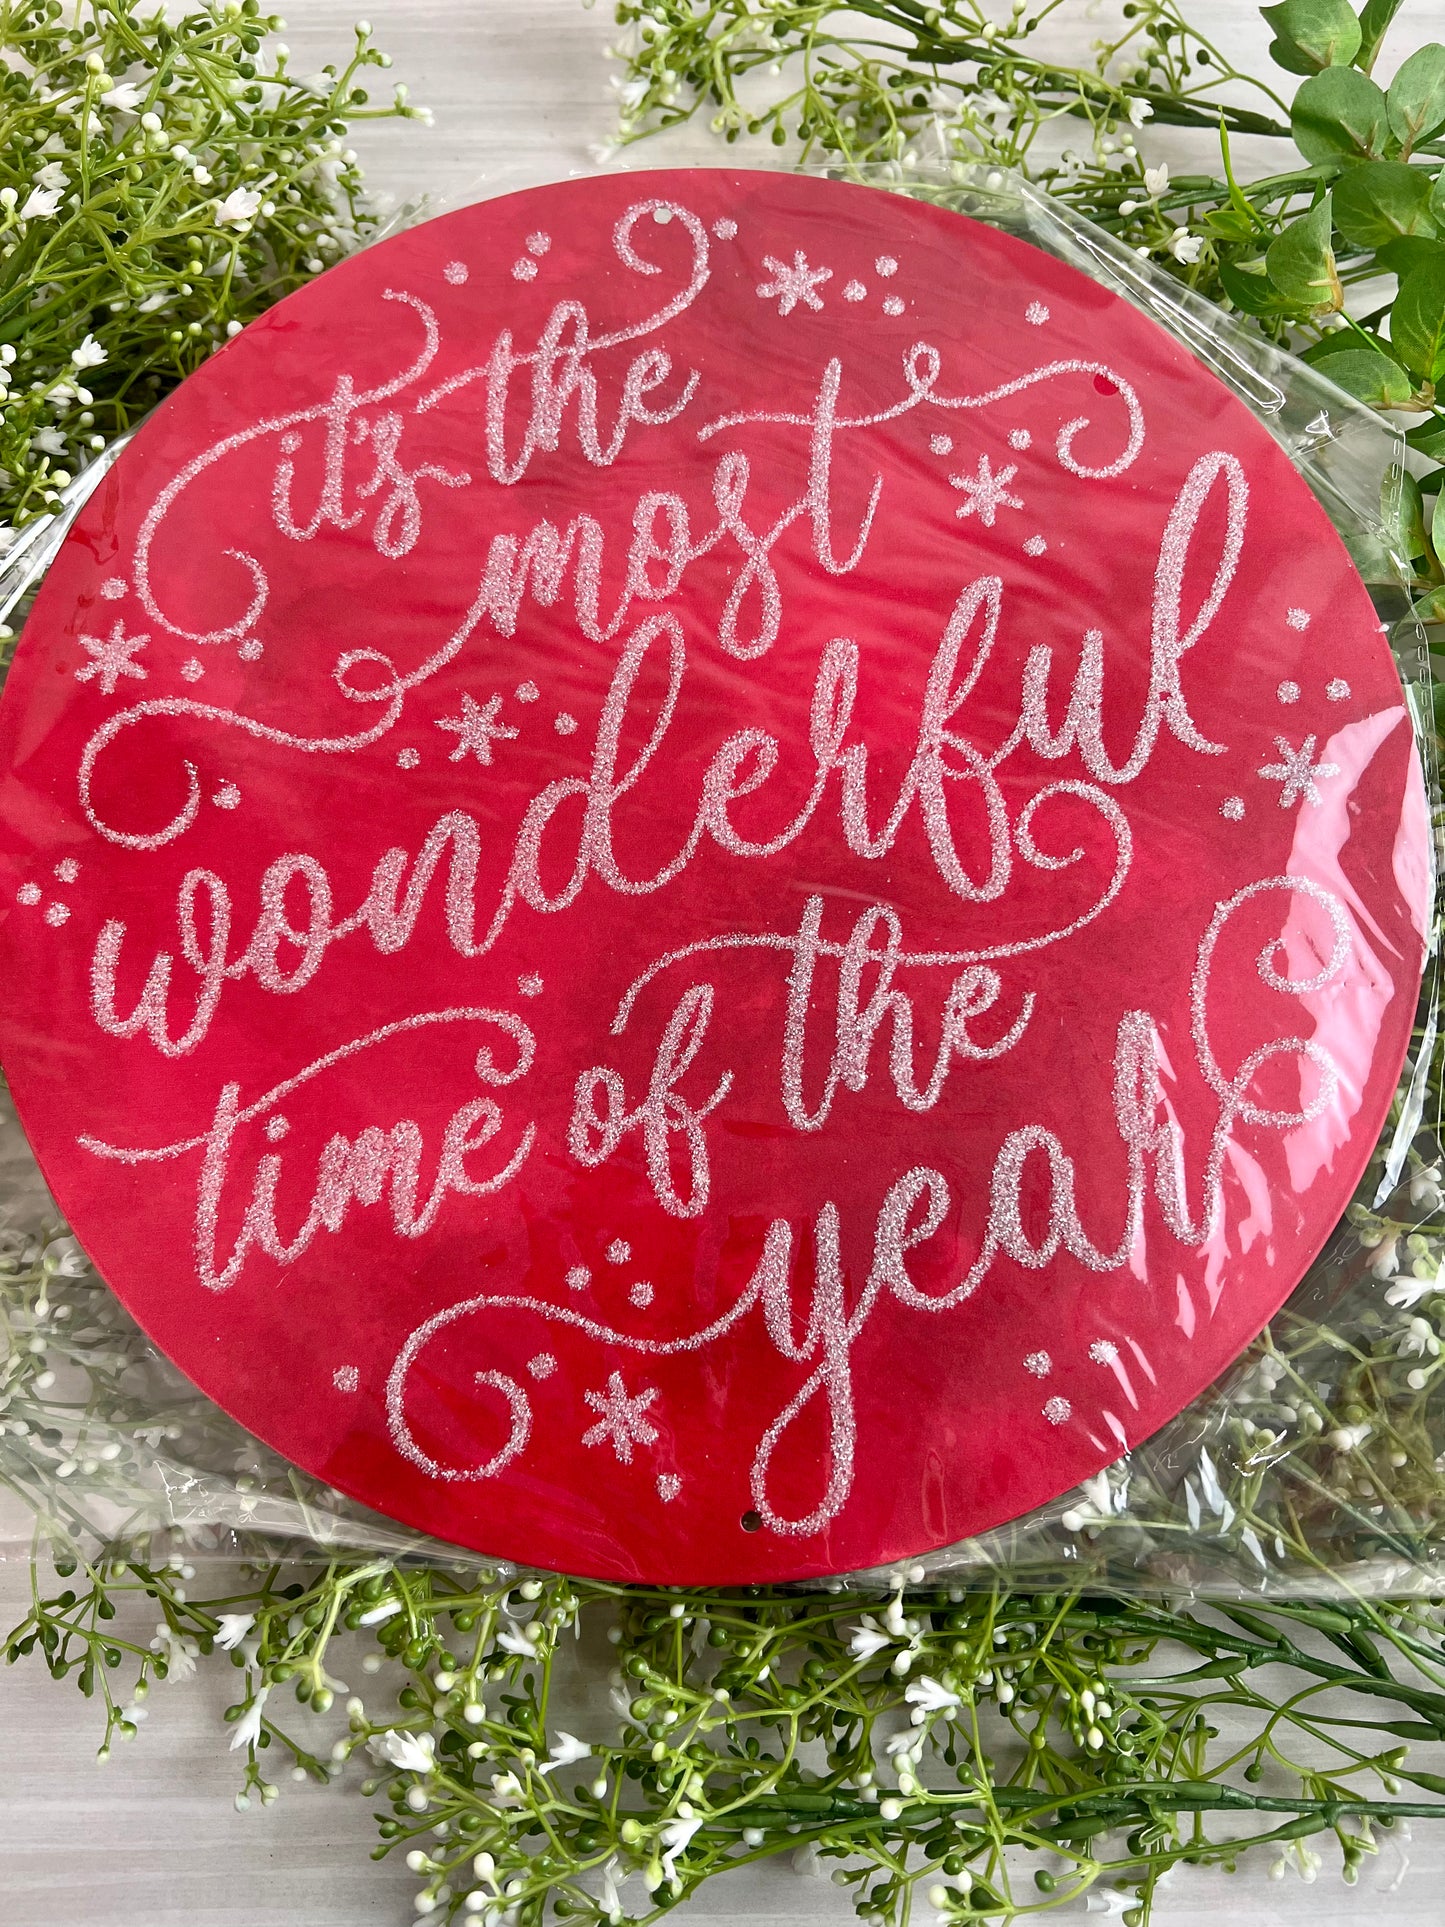 Most Wonderful Time Of Year Metal Sign